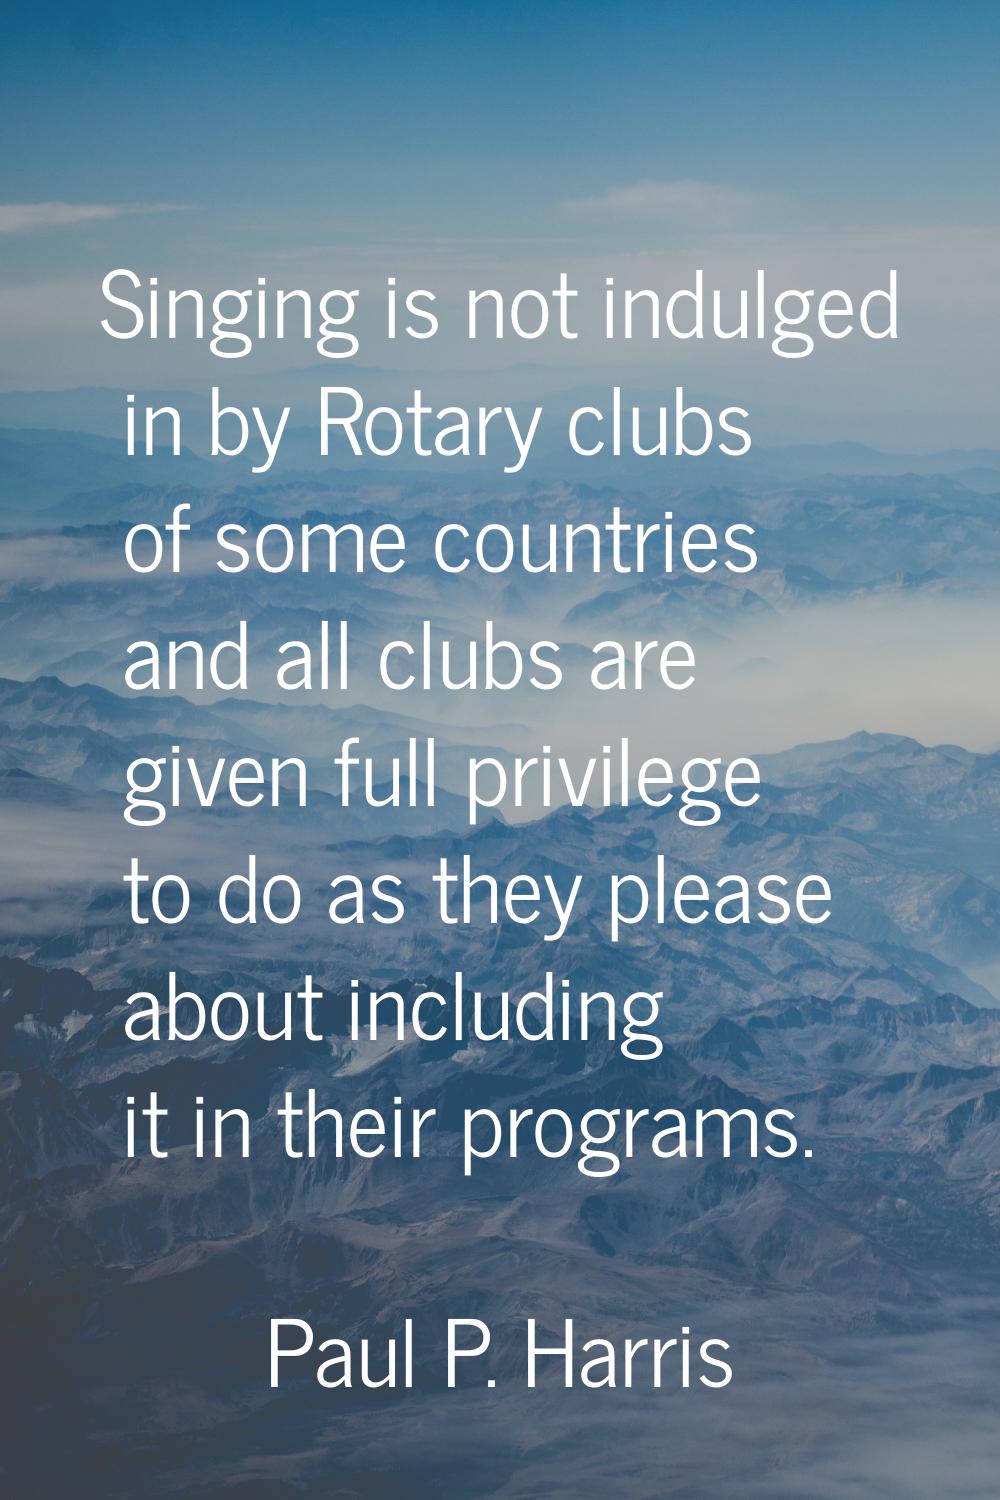 Singing is not indulged in by Rotary clubs of some countries and all clubs are given full privilege